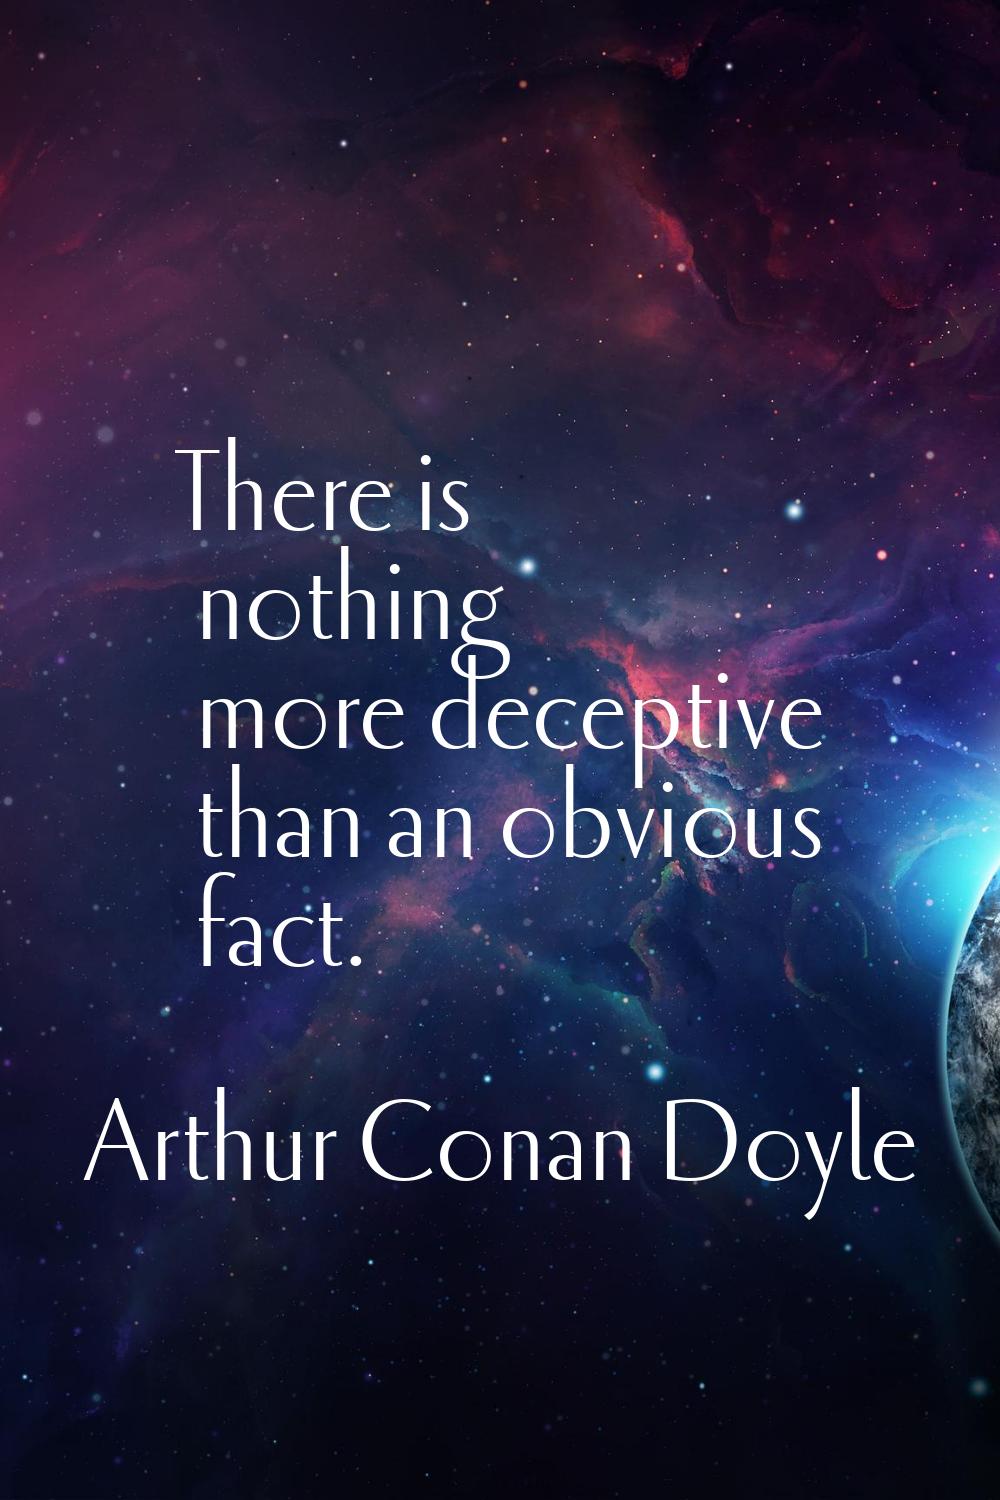 There is nothing more deceptive than an obvious fact.